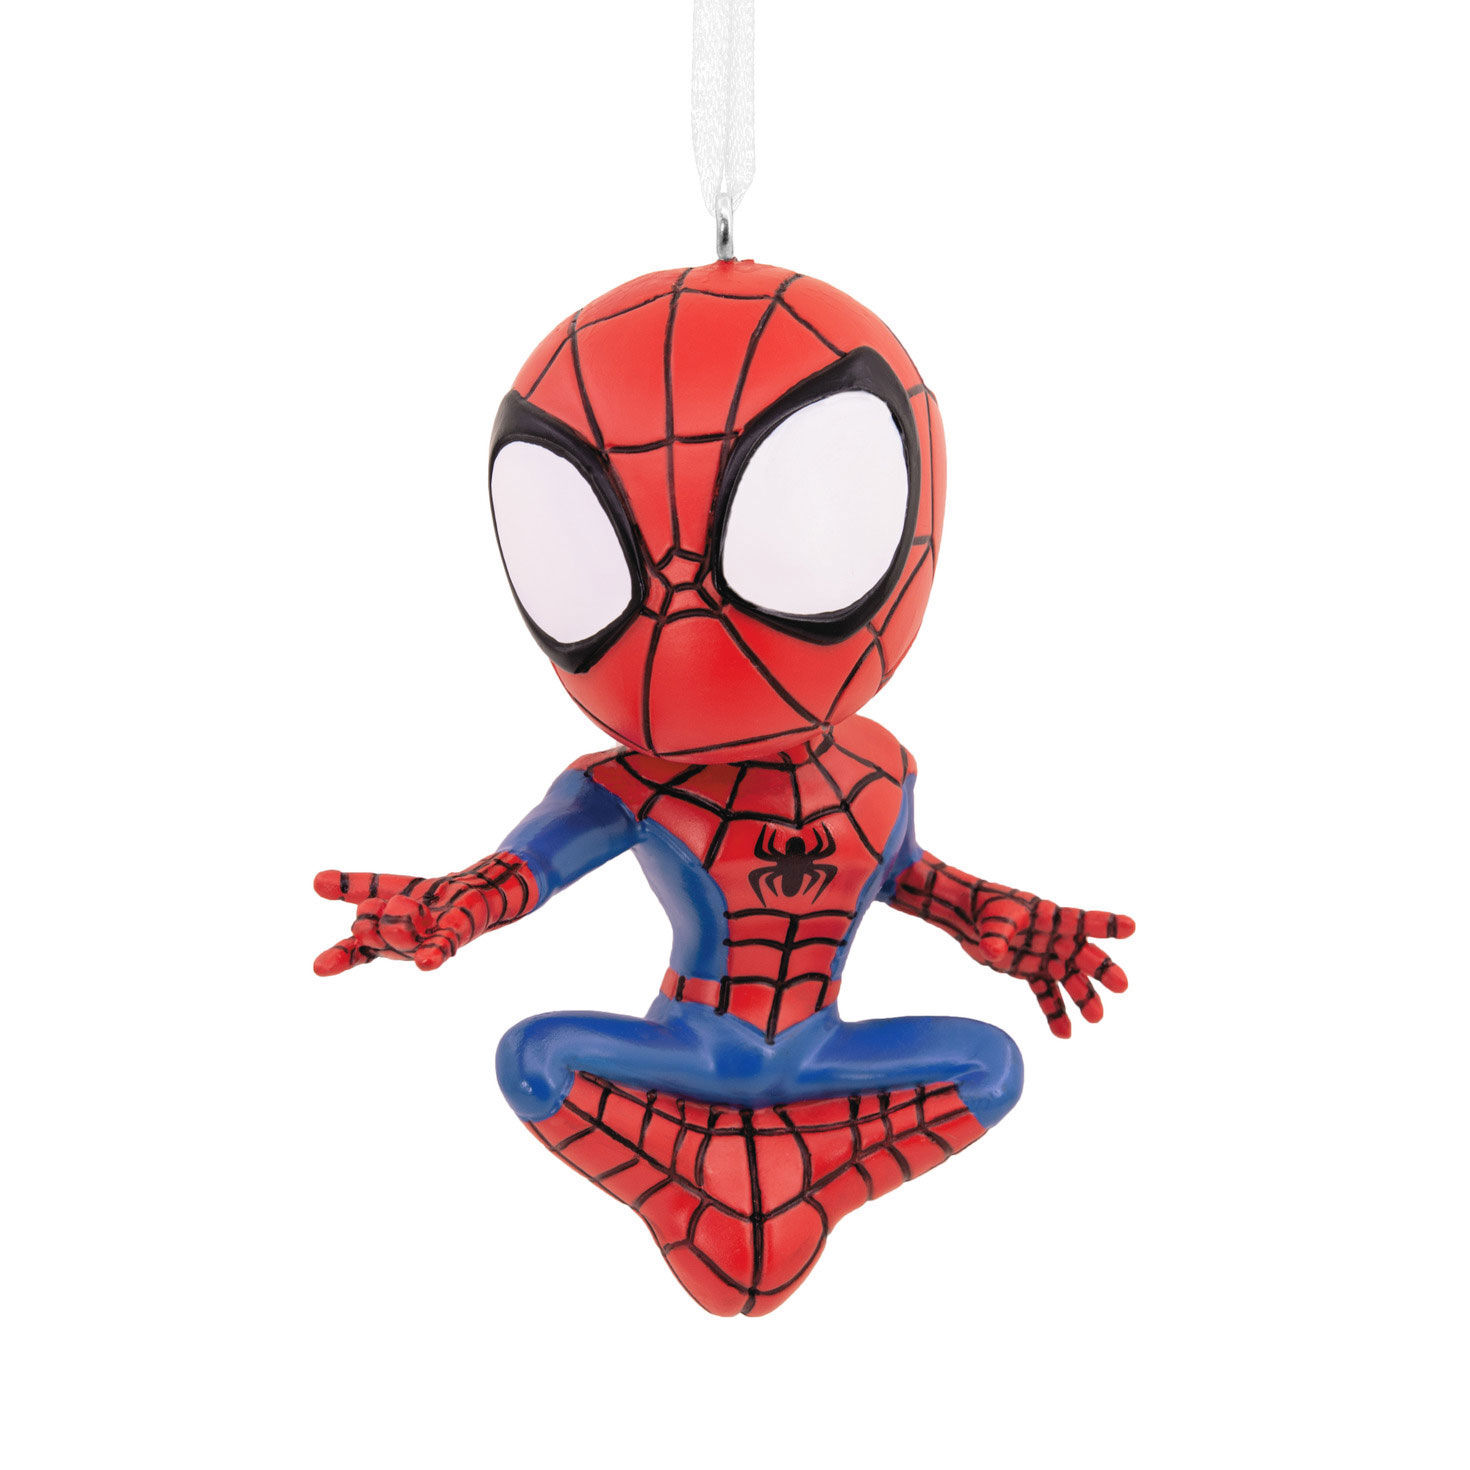 https://www.hallmark.com/dw/image/v2/AALB_PRD/on/demandware.static/-/Sites-hallmark-master/default/dw1fceb17b/images/finished-goods/products/3HCM873/Marvel-Spidey-and-his-Amazing-Friends-SpiderMan-Christmas-Ornament_3HCM873_01.jpg?sfrm=jpg